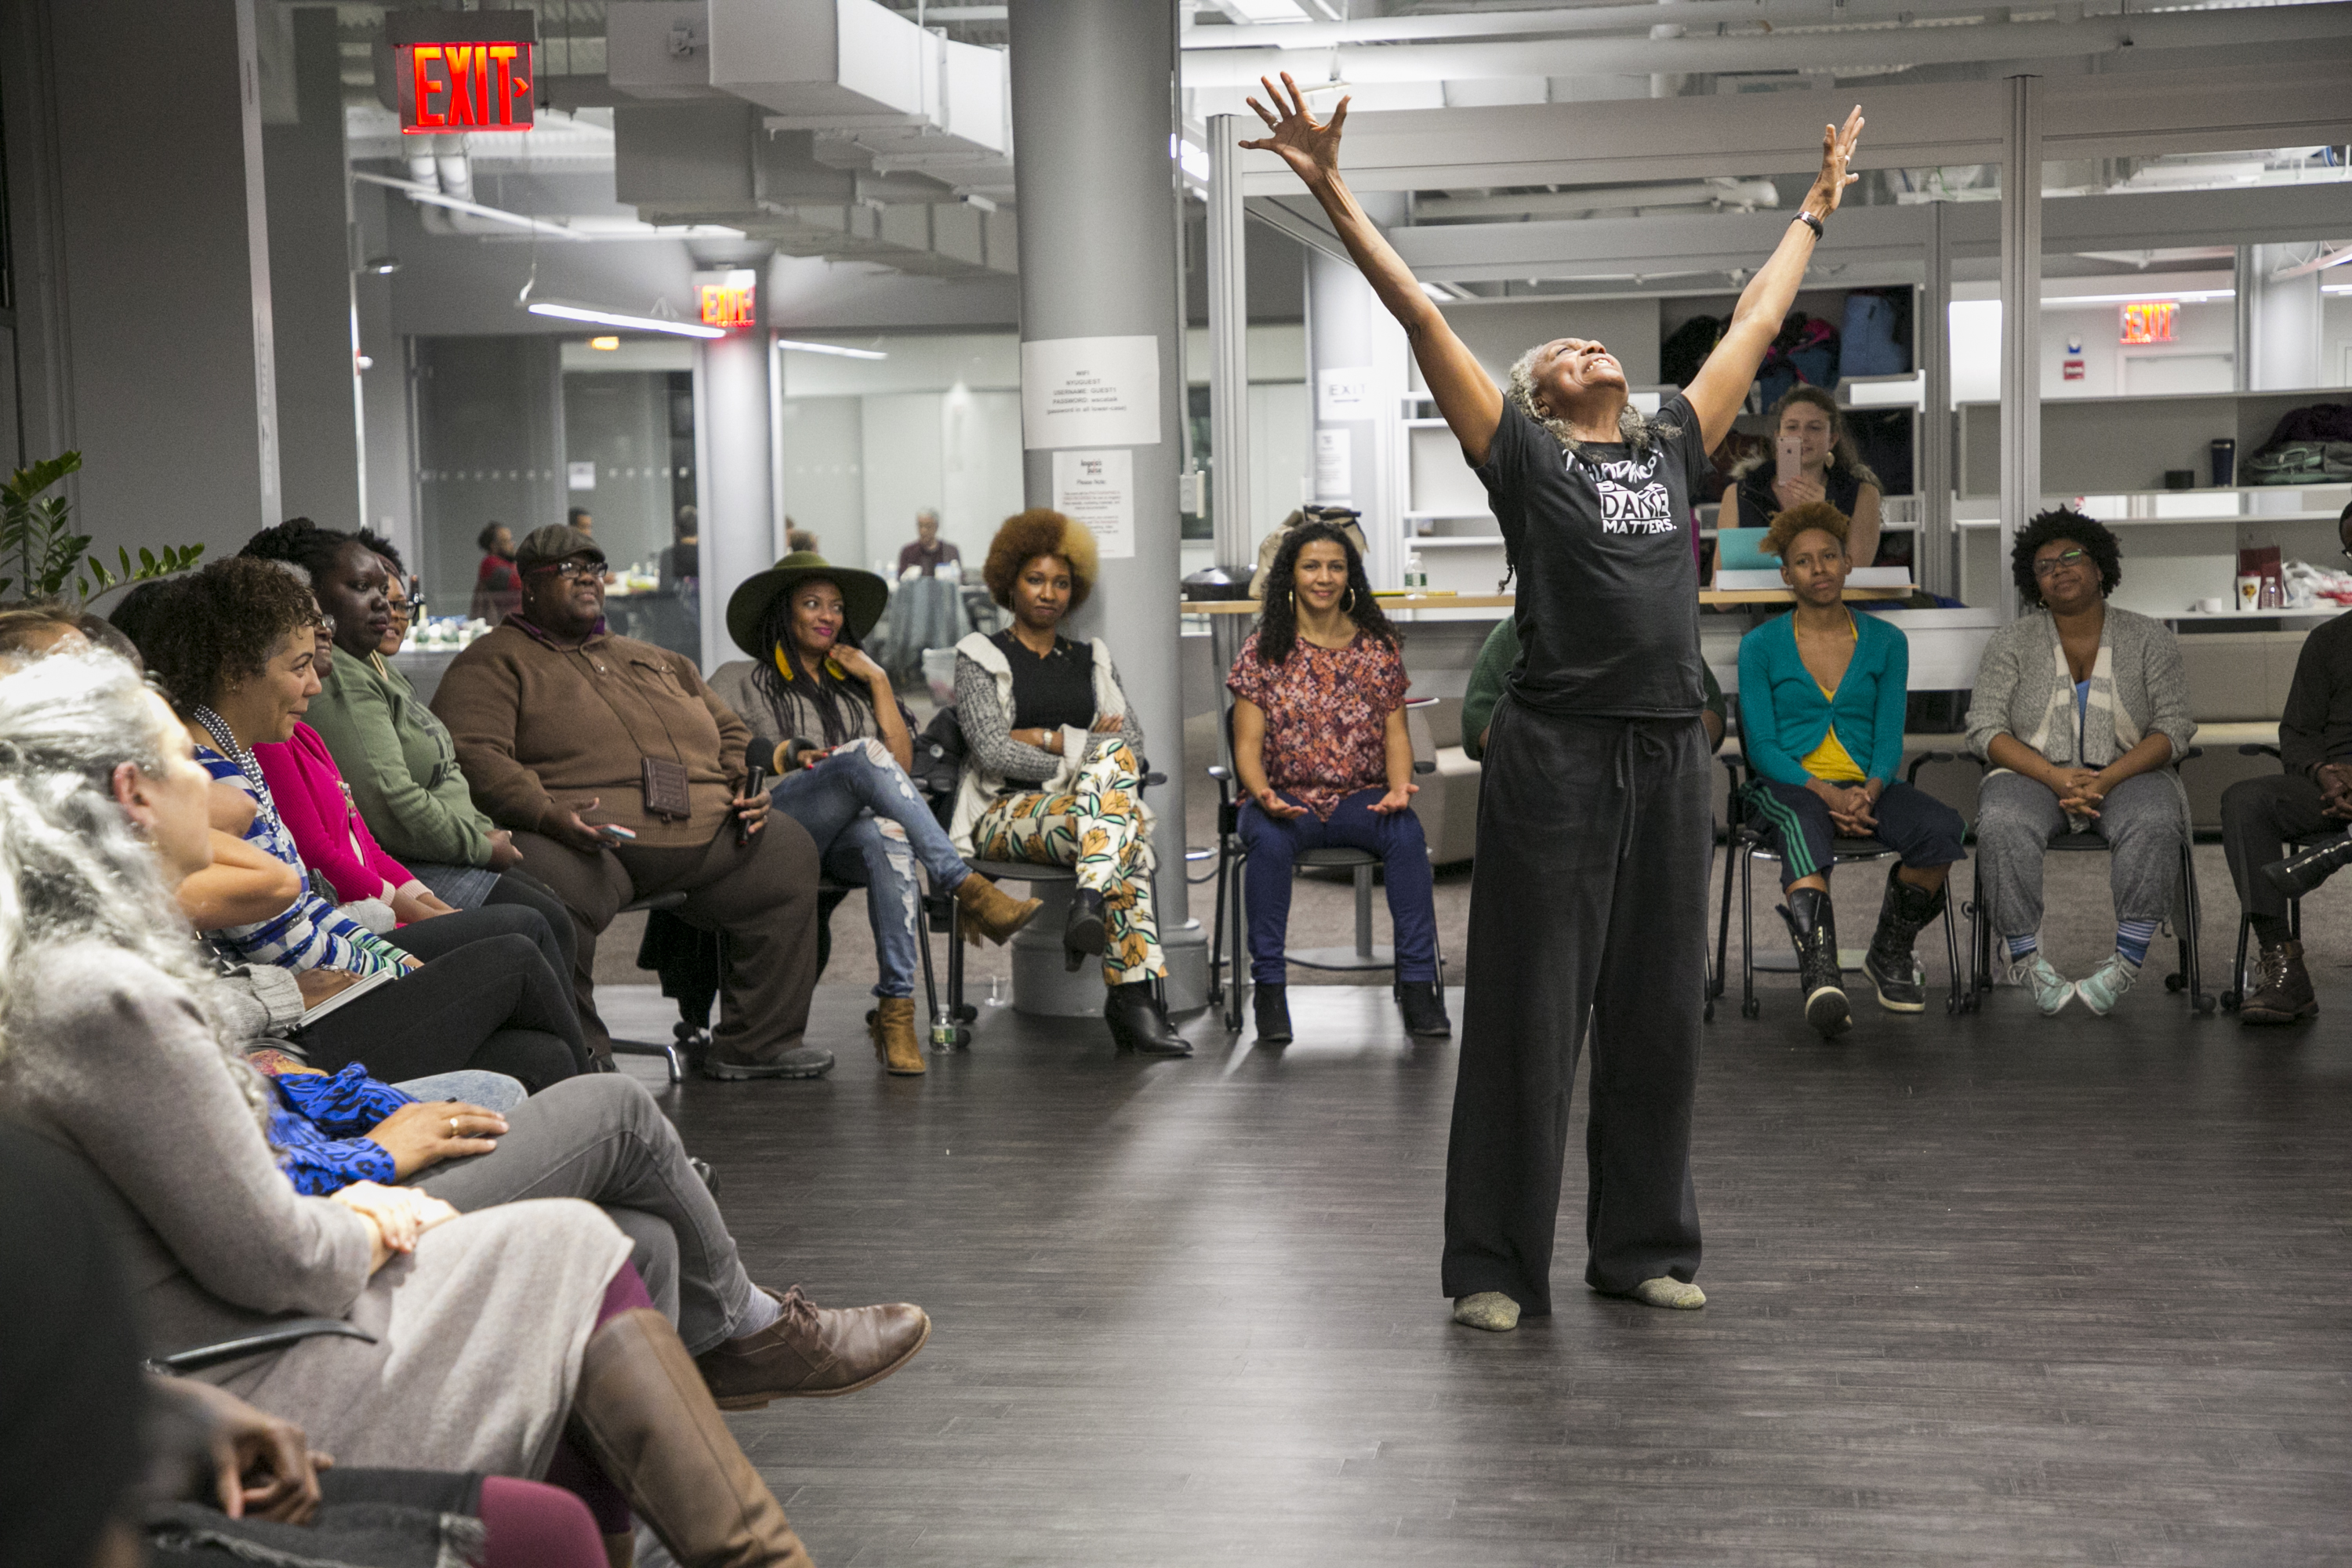 Dr. Brenda Dixon Gottschild raises her arms to the sky, surrounded by a circle of Dancing While Black community members at Dancing While Black: This Body Knows Freedom - Story Circles on Organizing toward Vision in an Age of Resistance at NYU's Hemispheric Institute in November 2017. Photo by Whitney Browne.